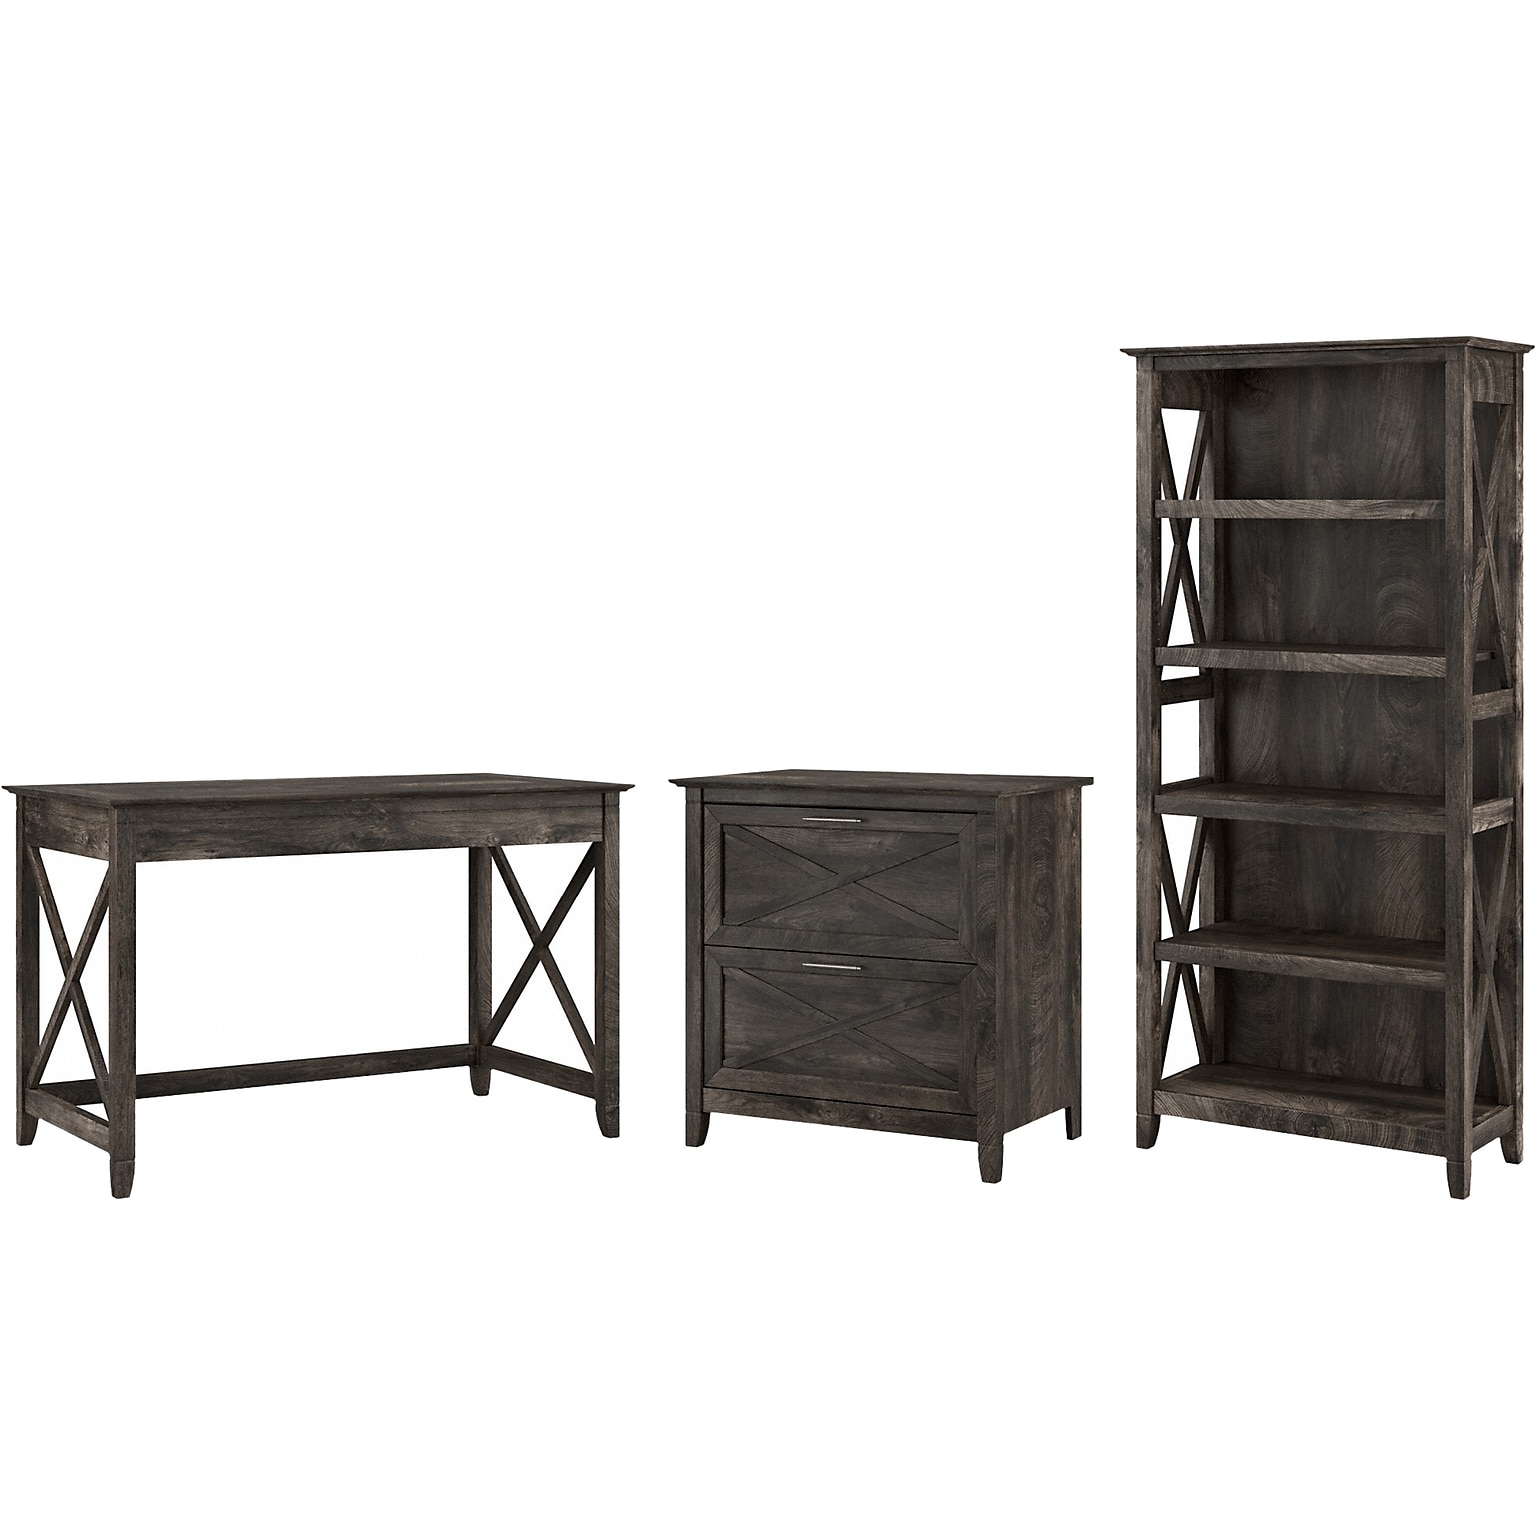 Bush Furniture Key West 48W Writing Desk with 2 Drawer Lateral File Cabinet and 5 Shelf Bookcase, Dark Gray Hickory (KWS004GH)